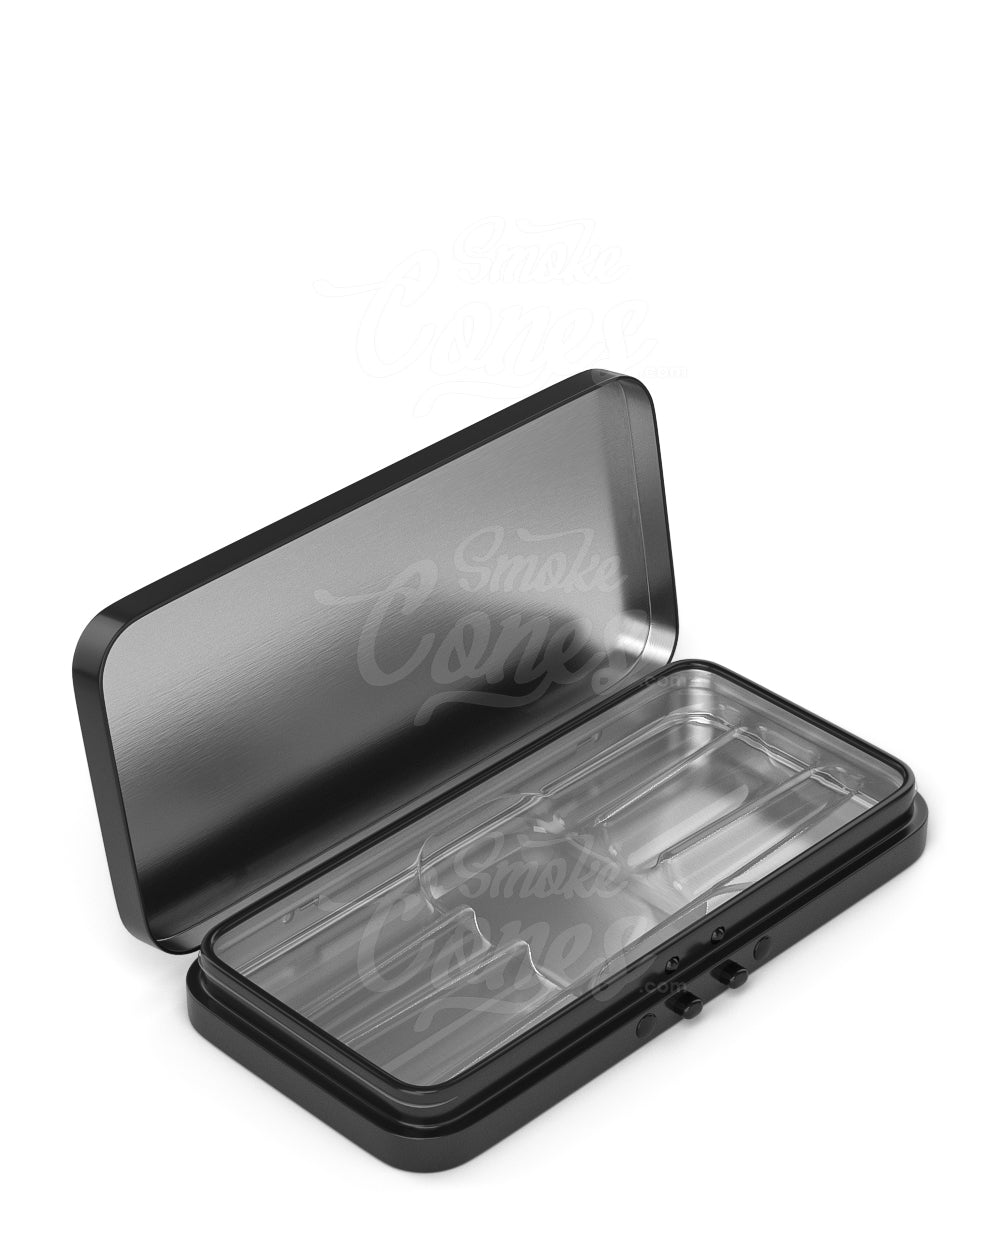 Clear Edible & Joint Box Plastic Insert Tray for 3 King Size 109mm Pre Rolled Cones 100/Box - 7